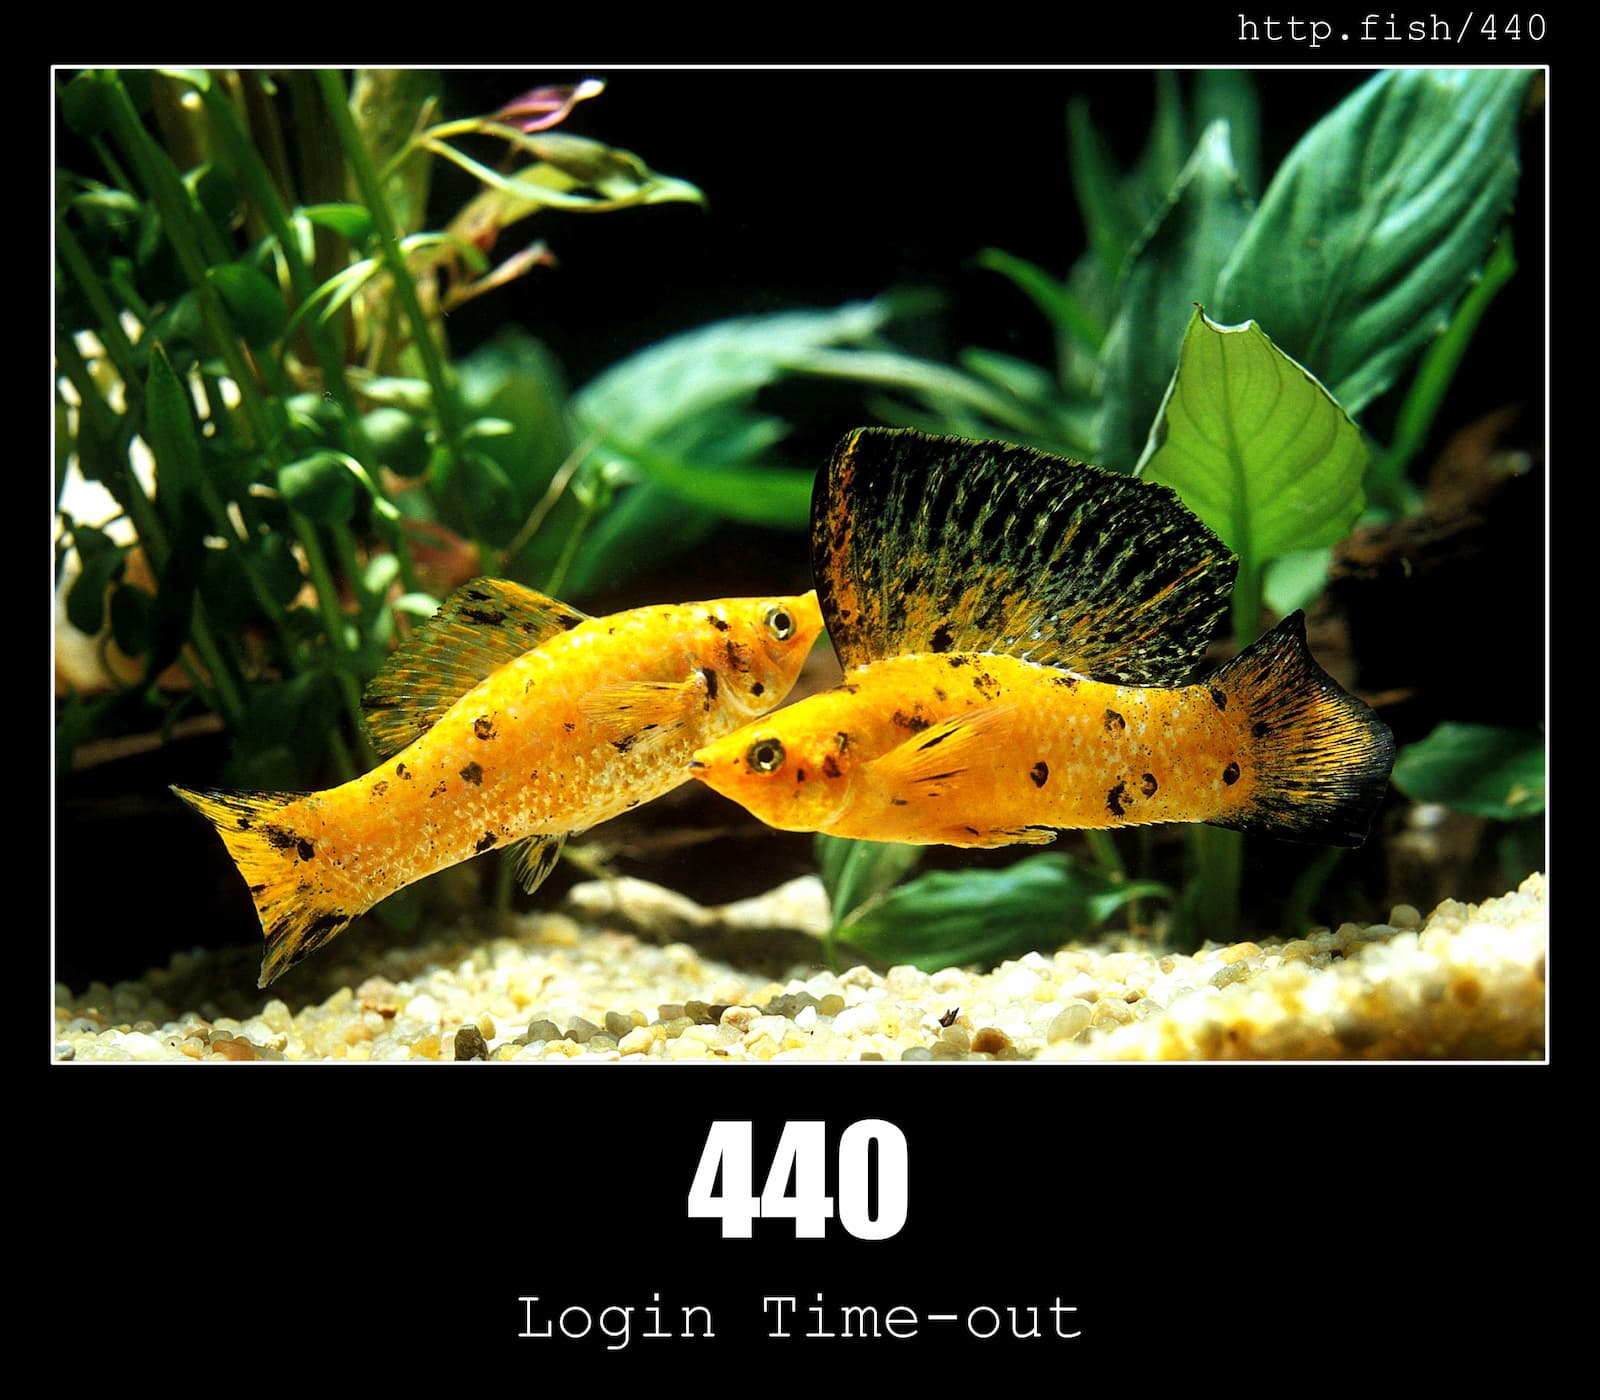 HTTP Status Code 440 Login Time-out & Fish